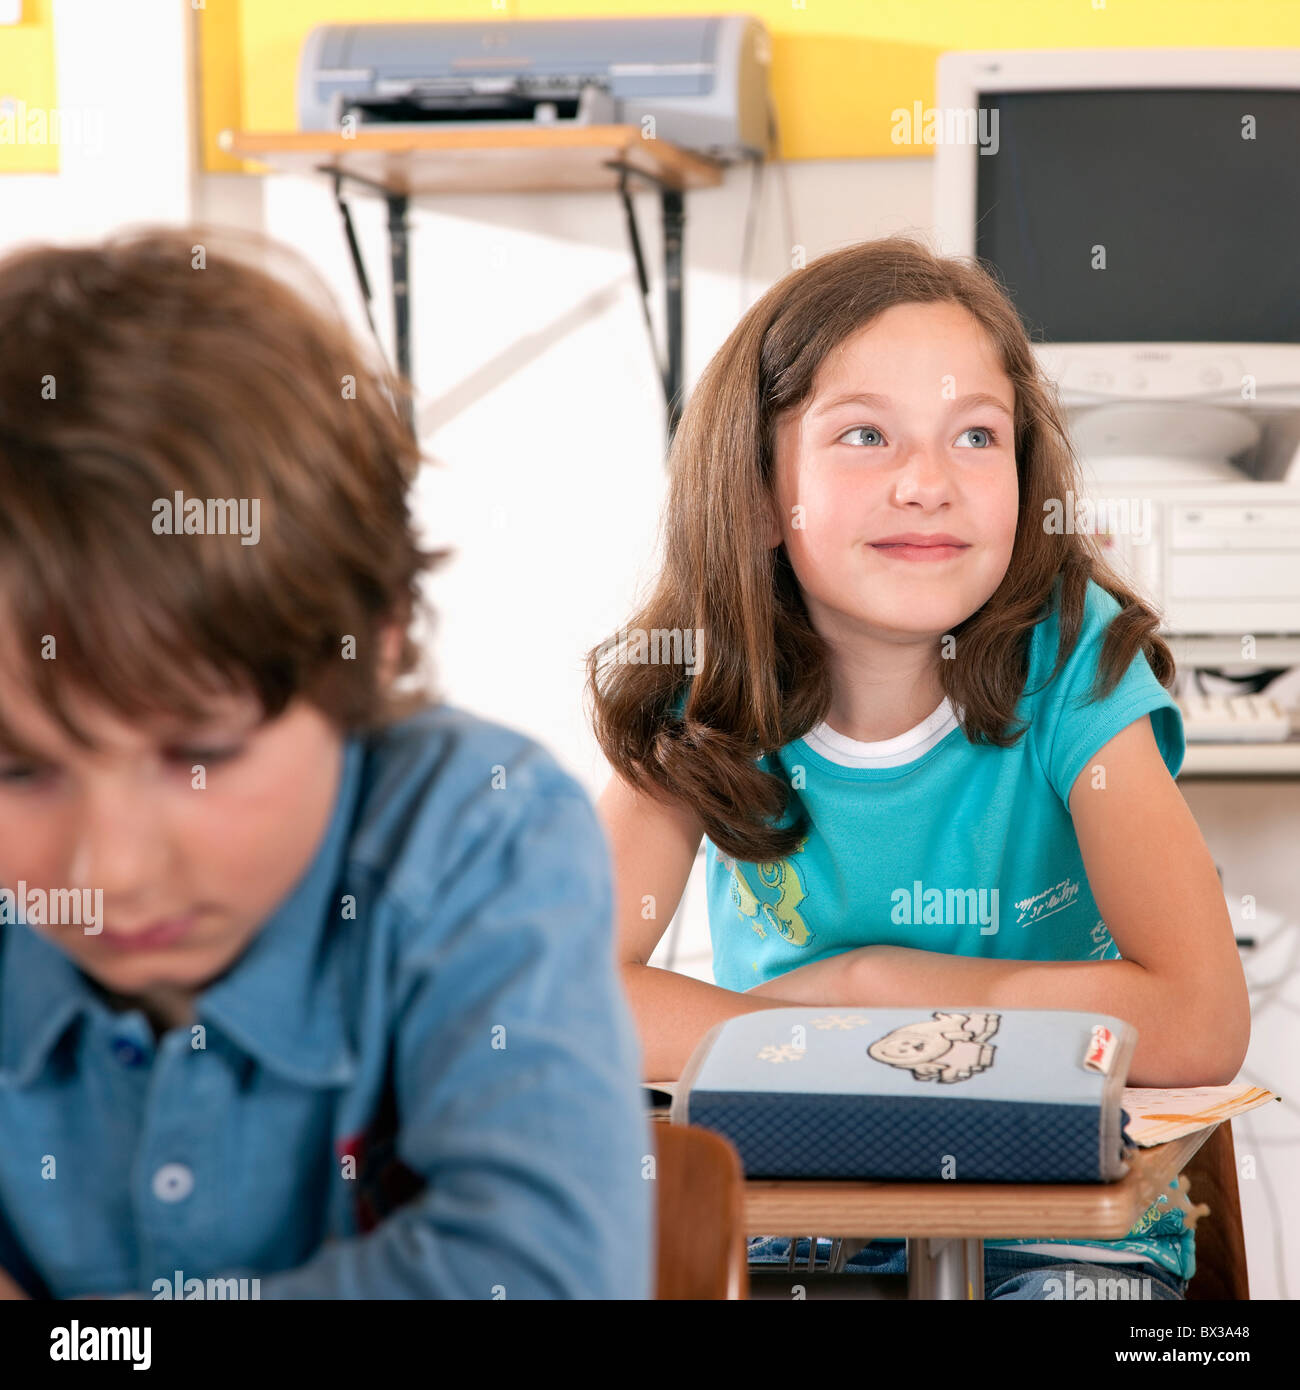 portrait of young girl sitting in classroom Stock Photo